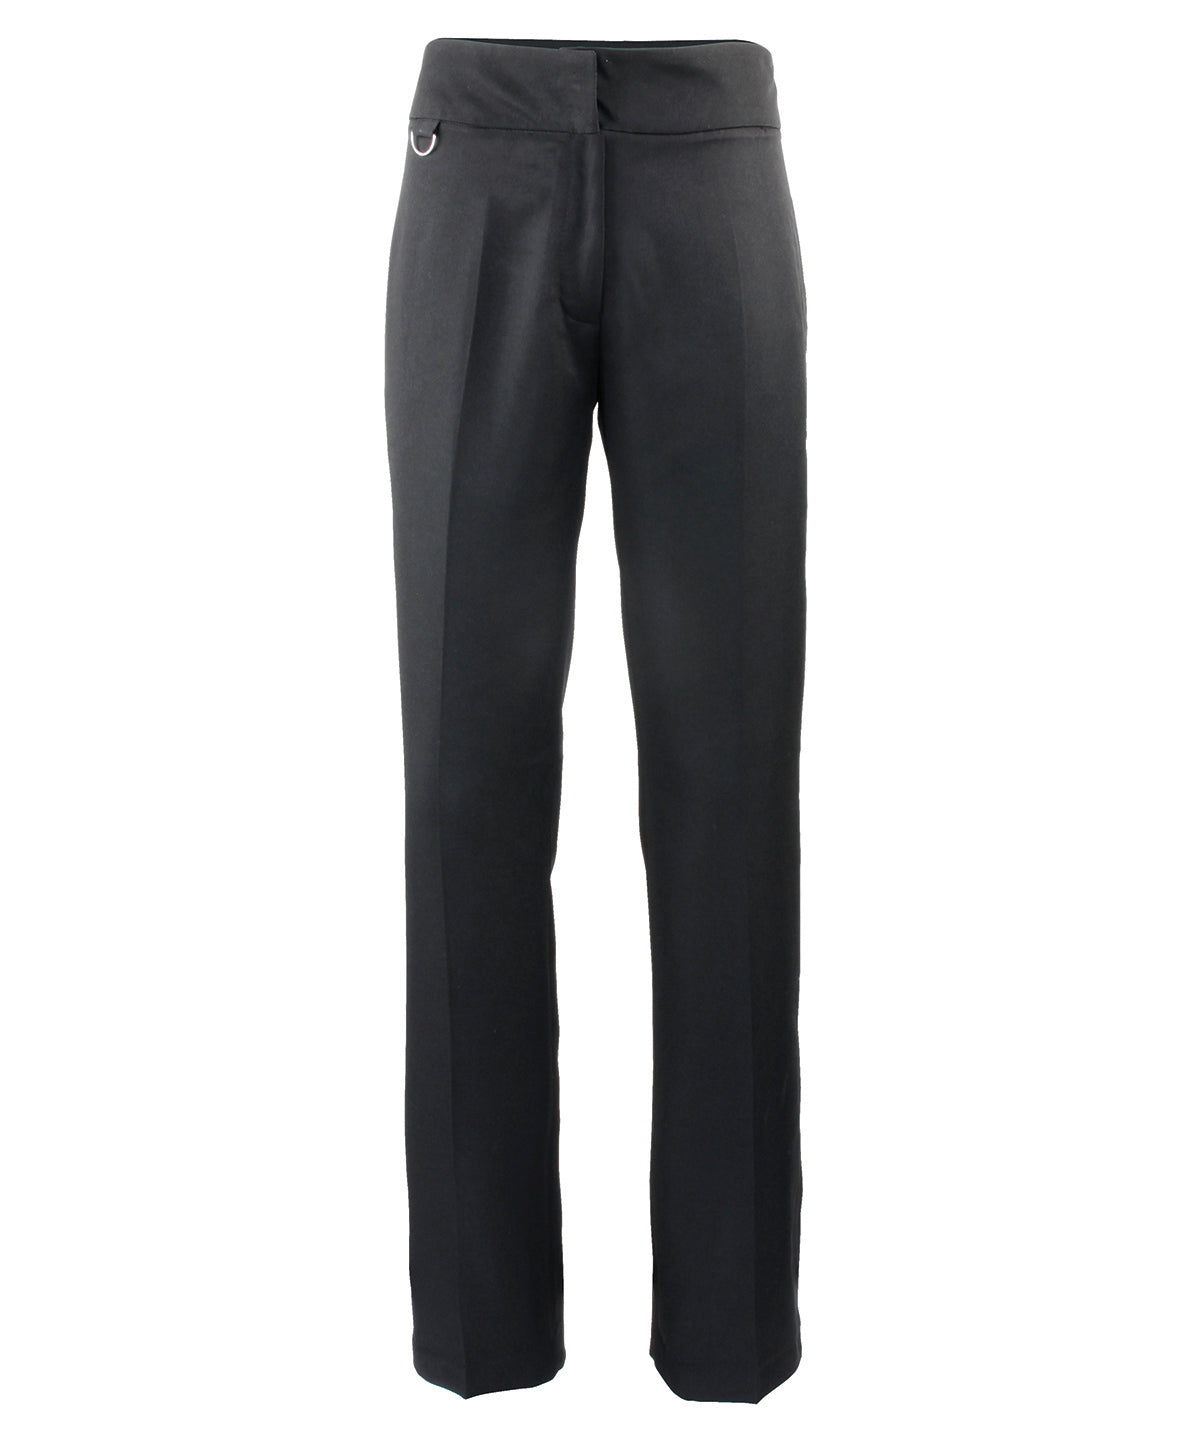 Buxur - Women's Flat Front Hospitality Trousers